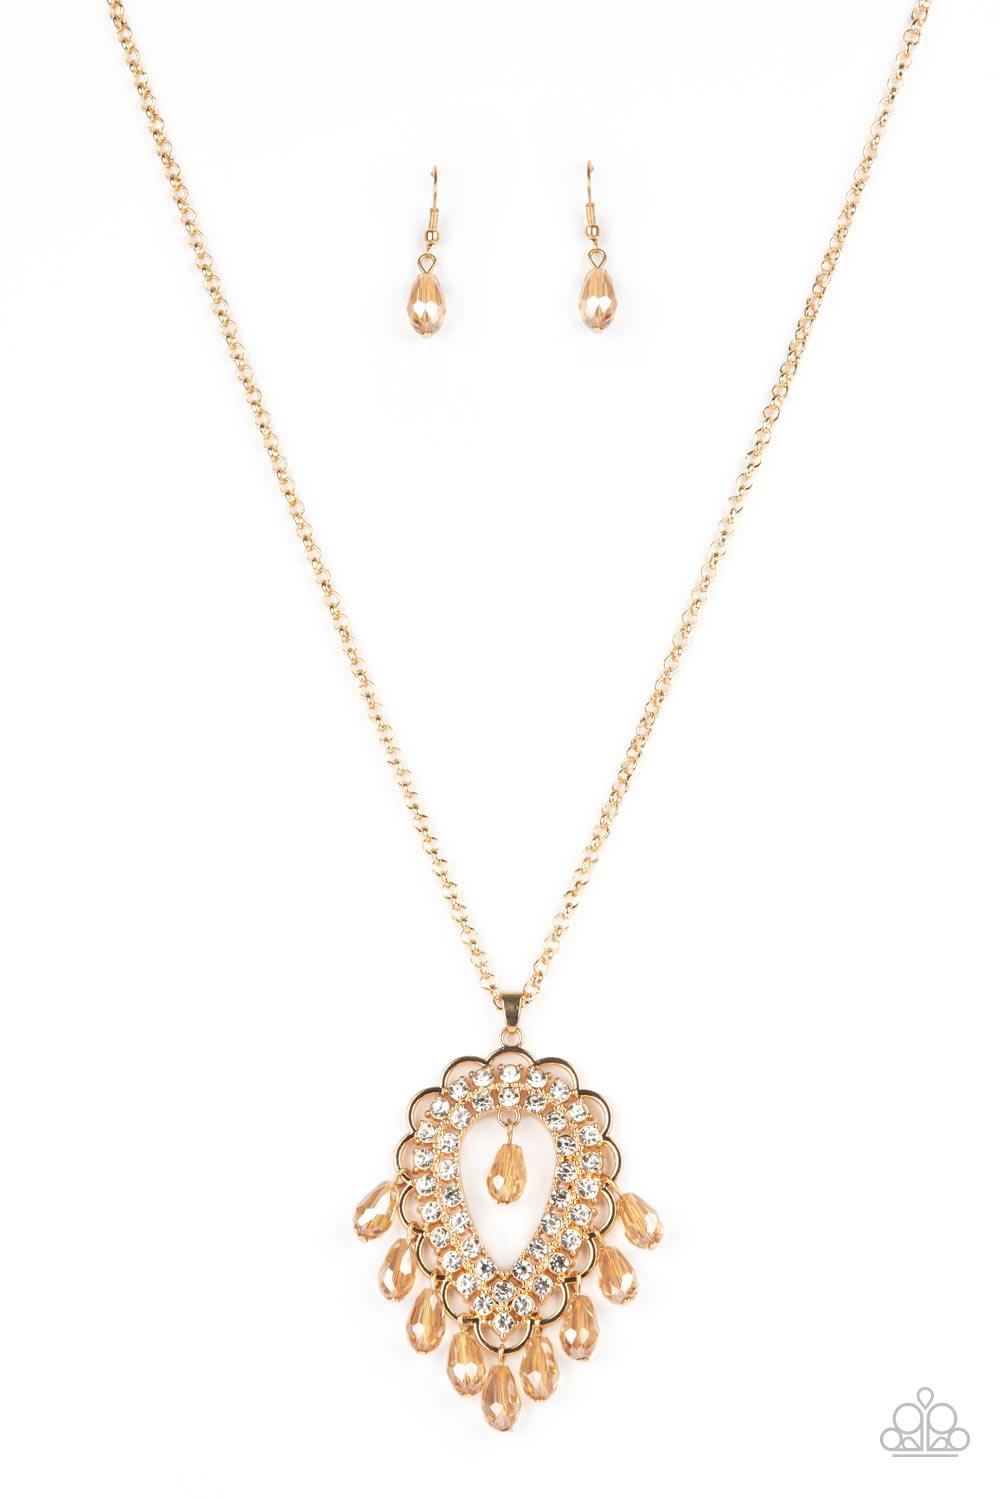 Paparazzi Accessories Teasable Teardrops - Gold An oversized scalloped teardrop frame, tipped on its point, encases rows of sparkling white rhinestones in its lustrous gold fittings. Shimmery faceted champagne teardrop beads dangle daintily from the scall